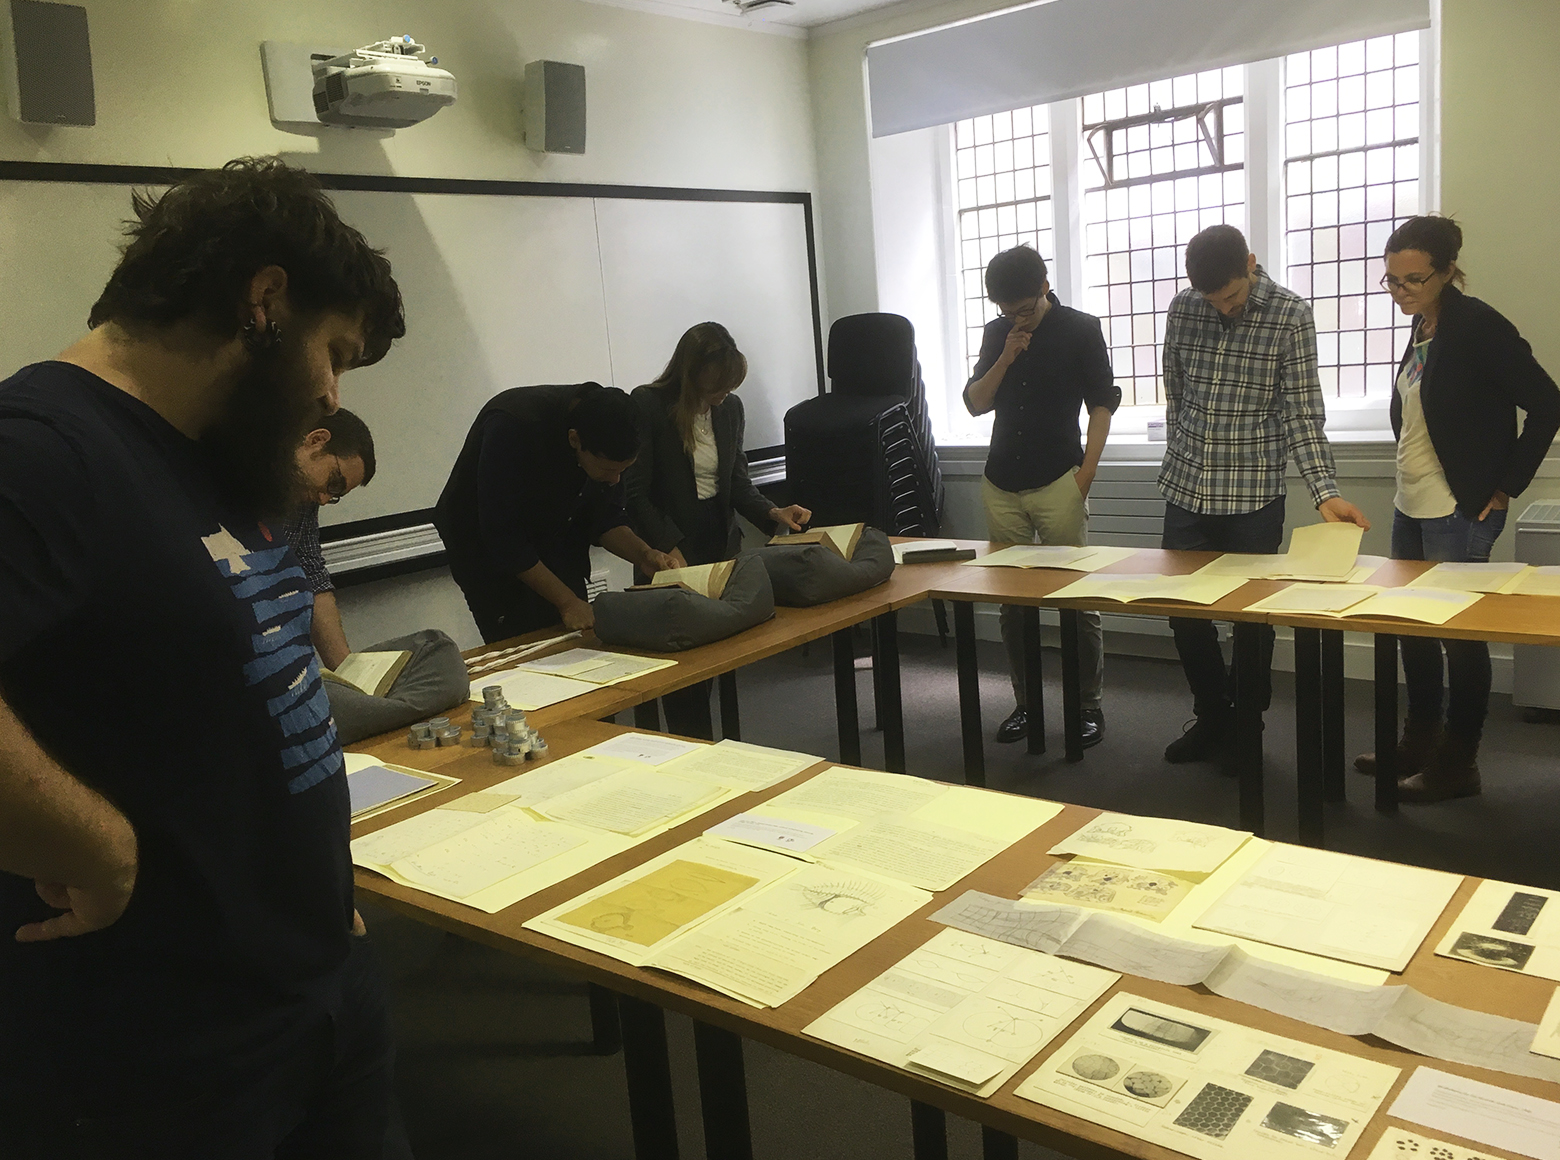 Workshop attendees looking at archive material displayed on tables